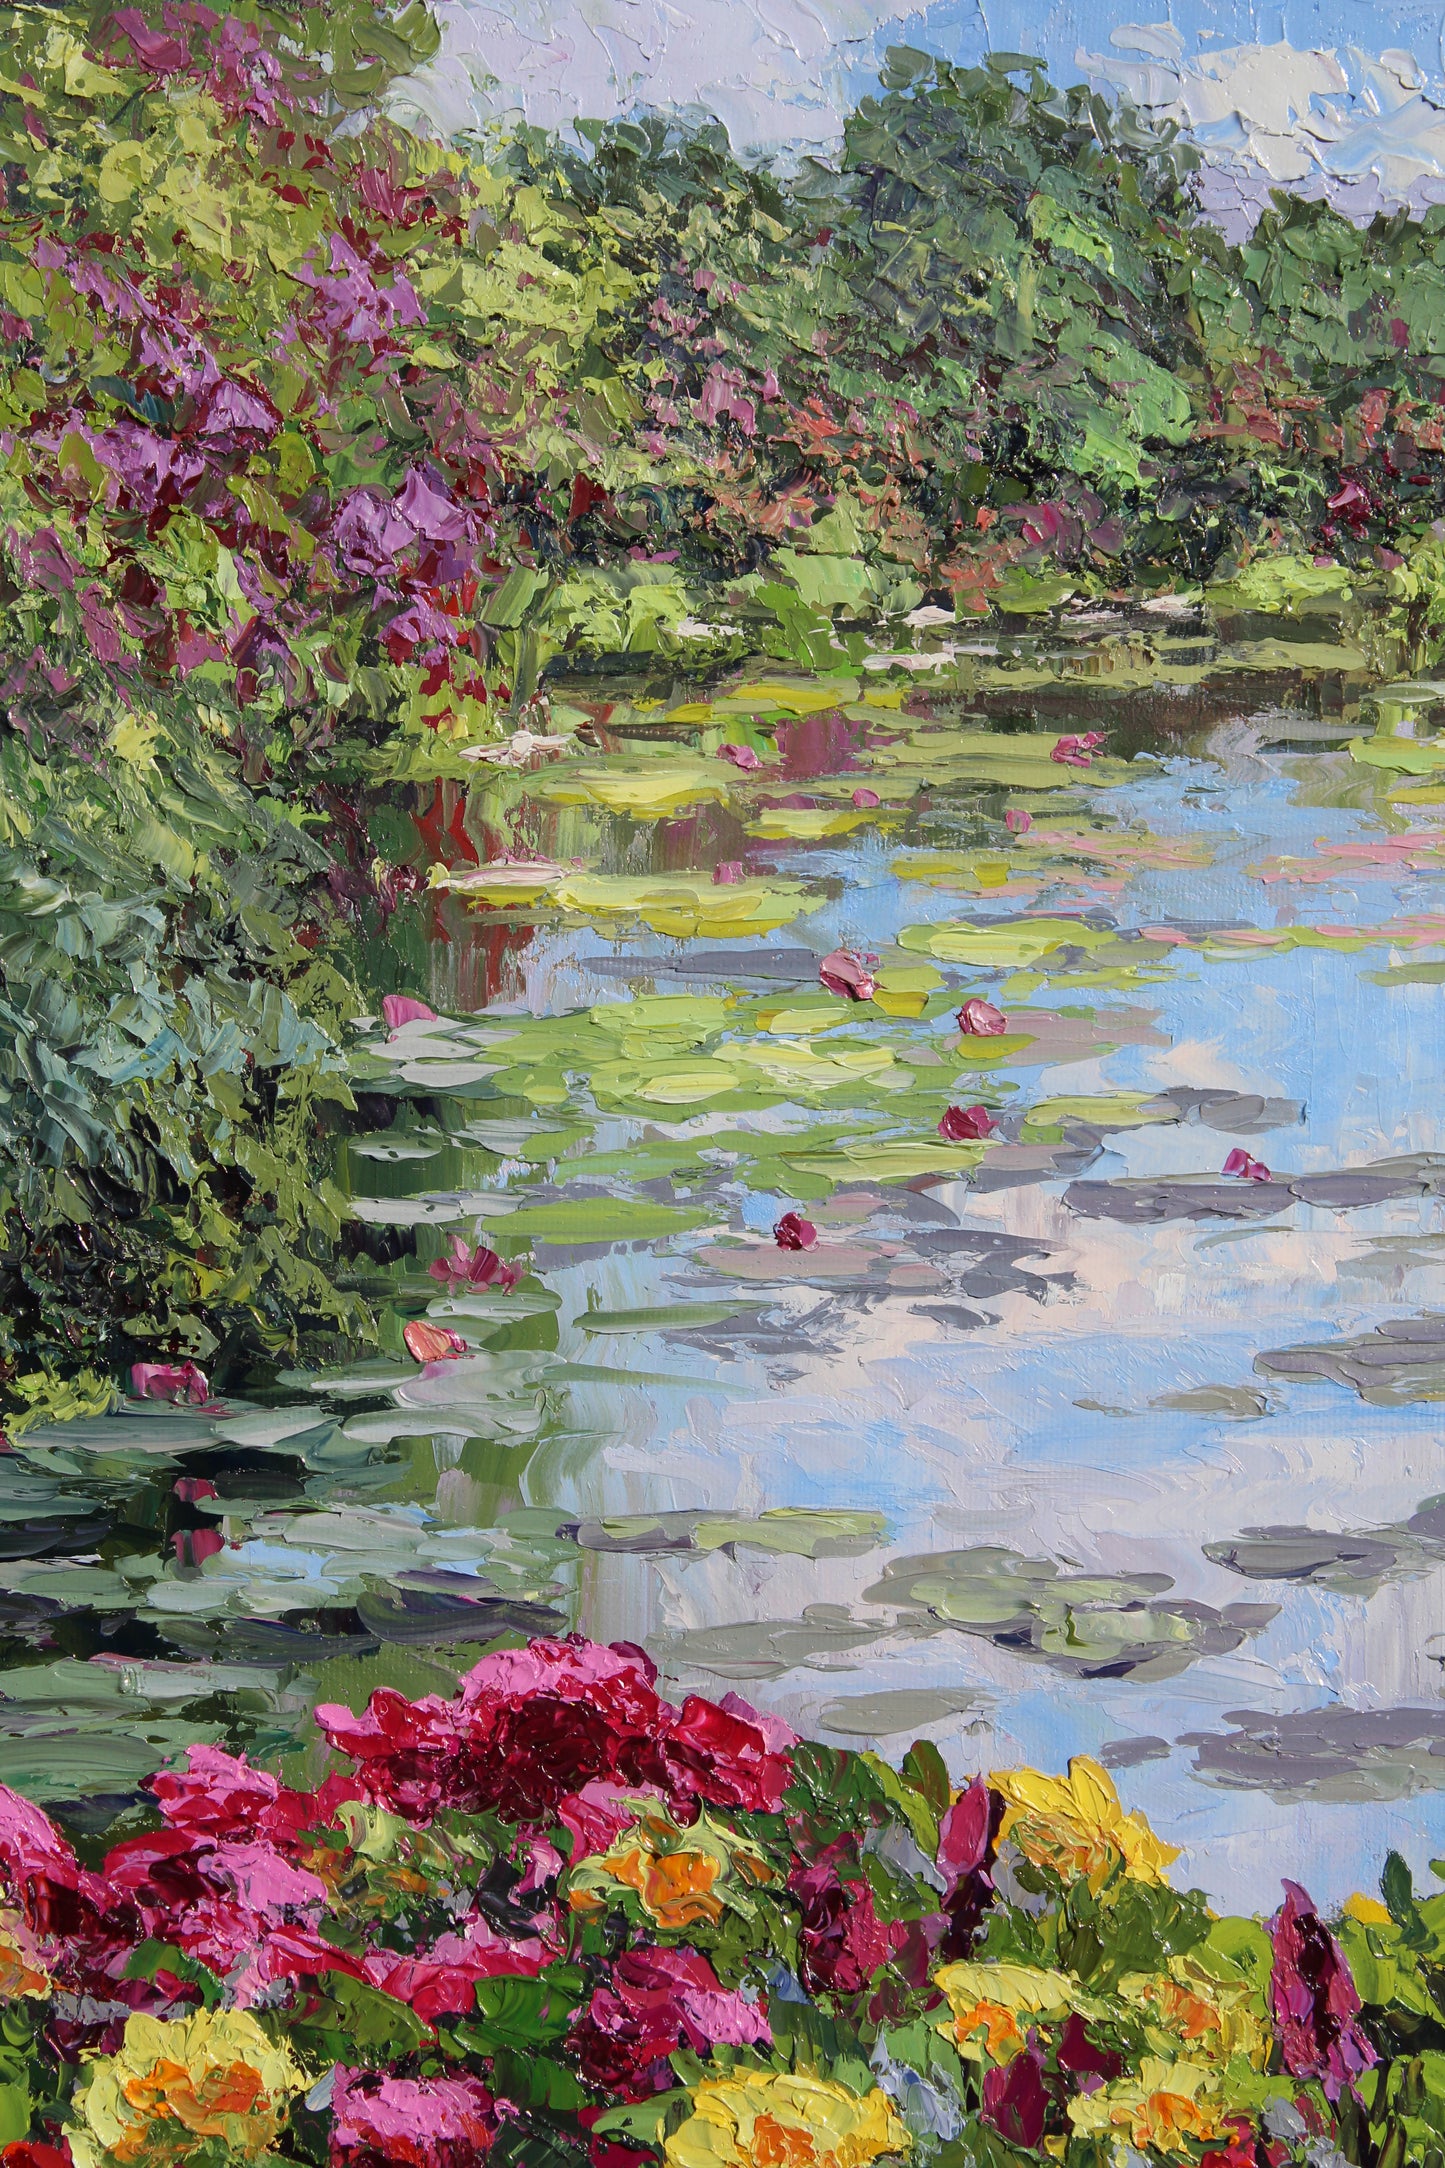 Dreams Of Giverny, 16" x 20" Garden Landscape Of Monet's Waterlily Pond, Oil On Canvas